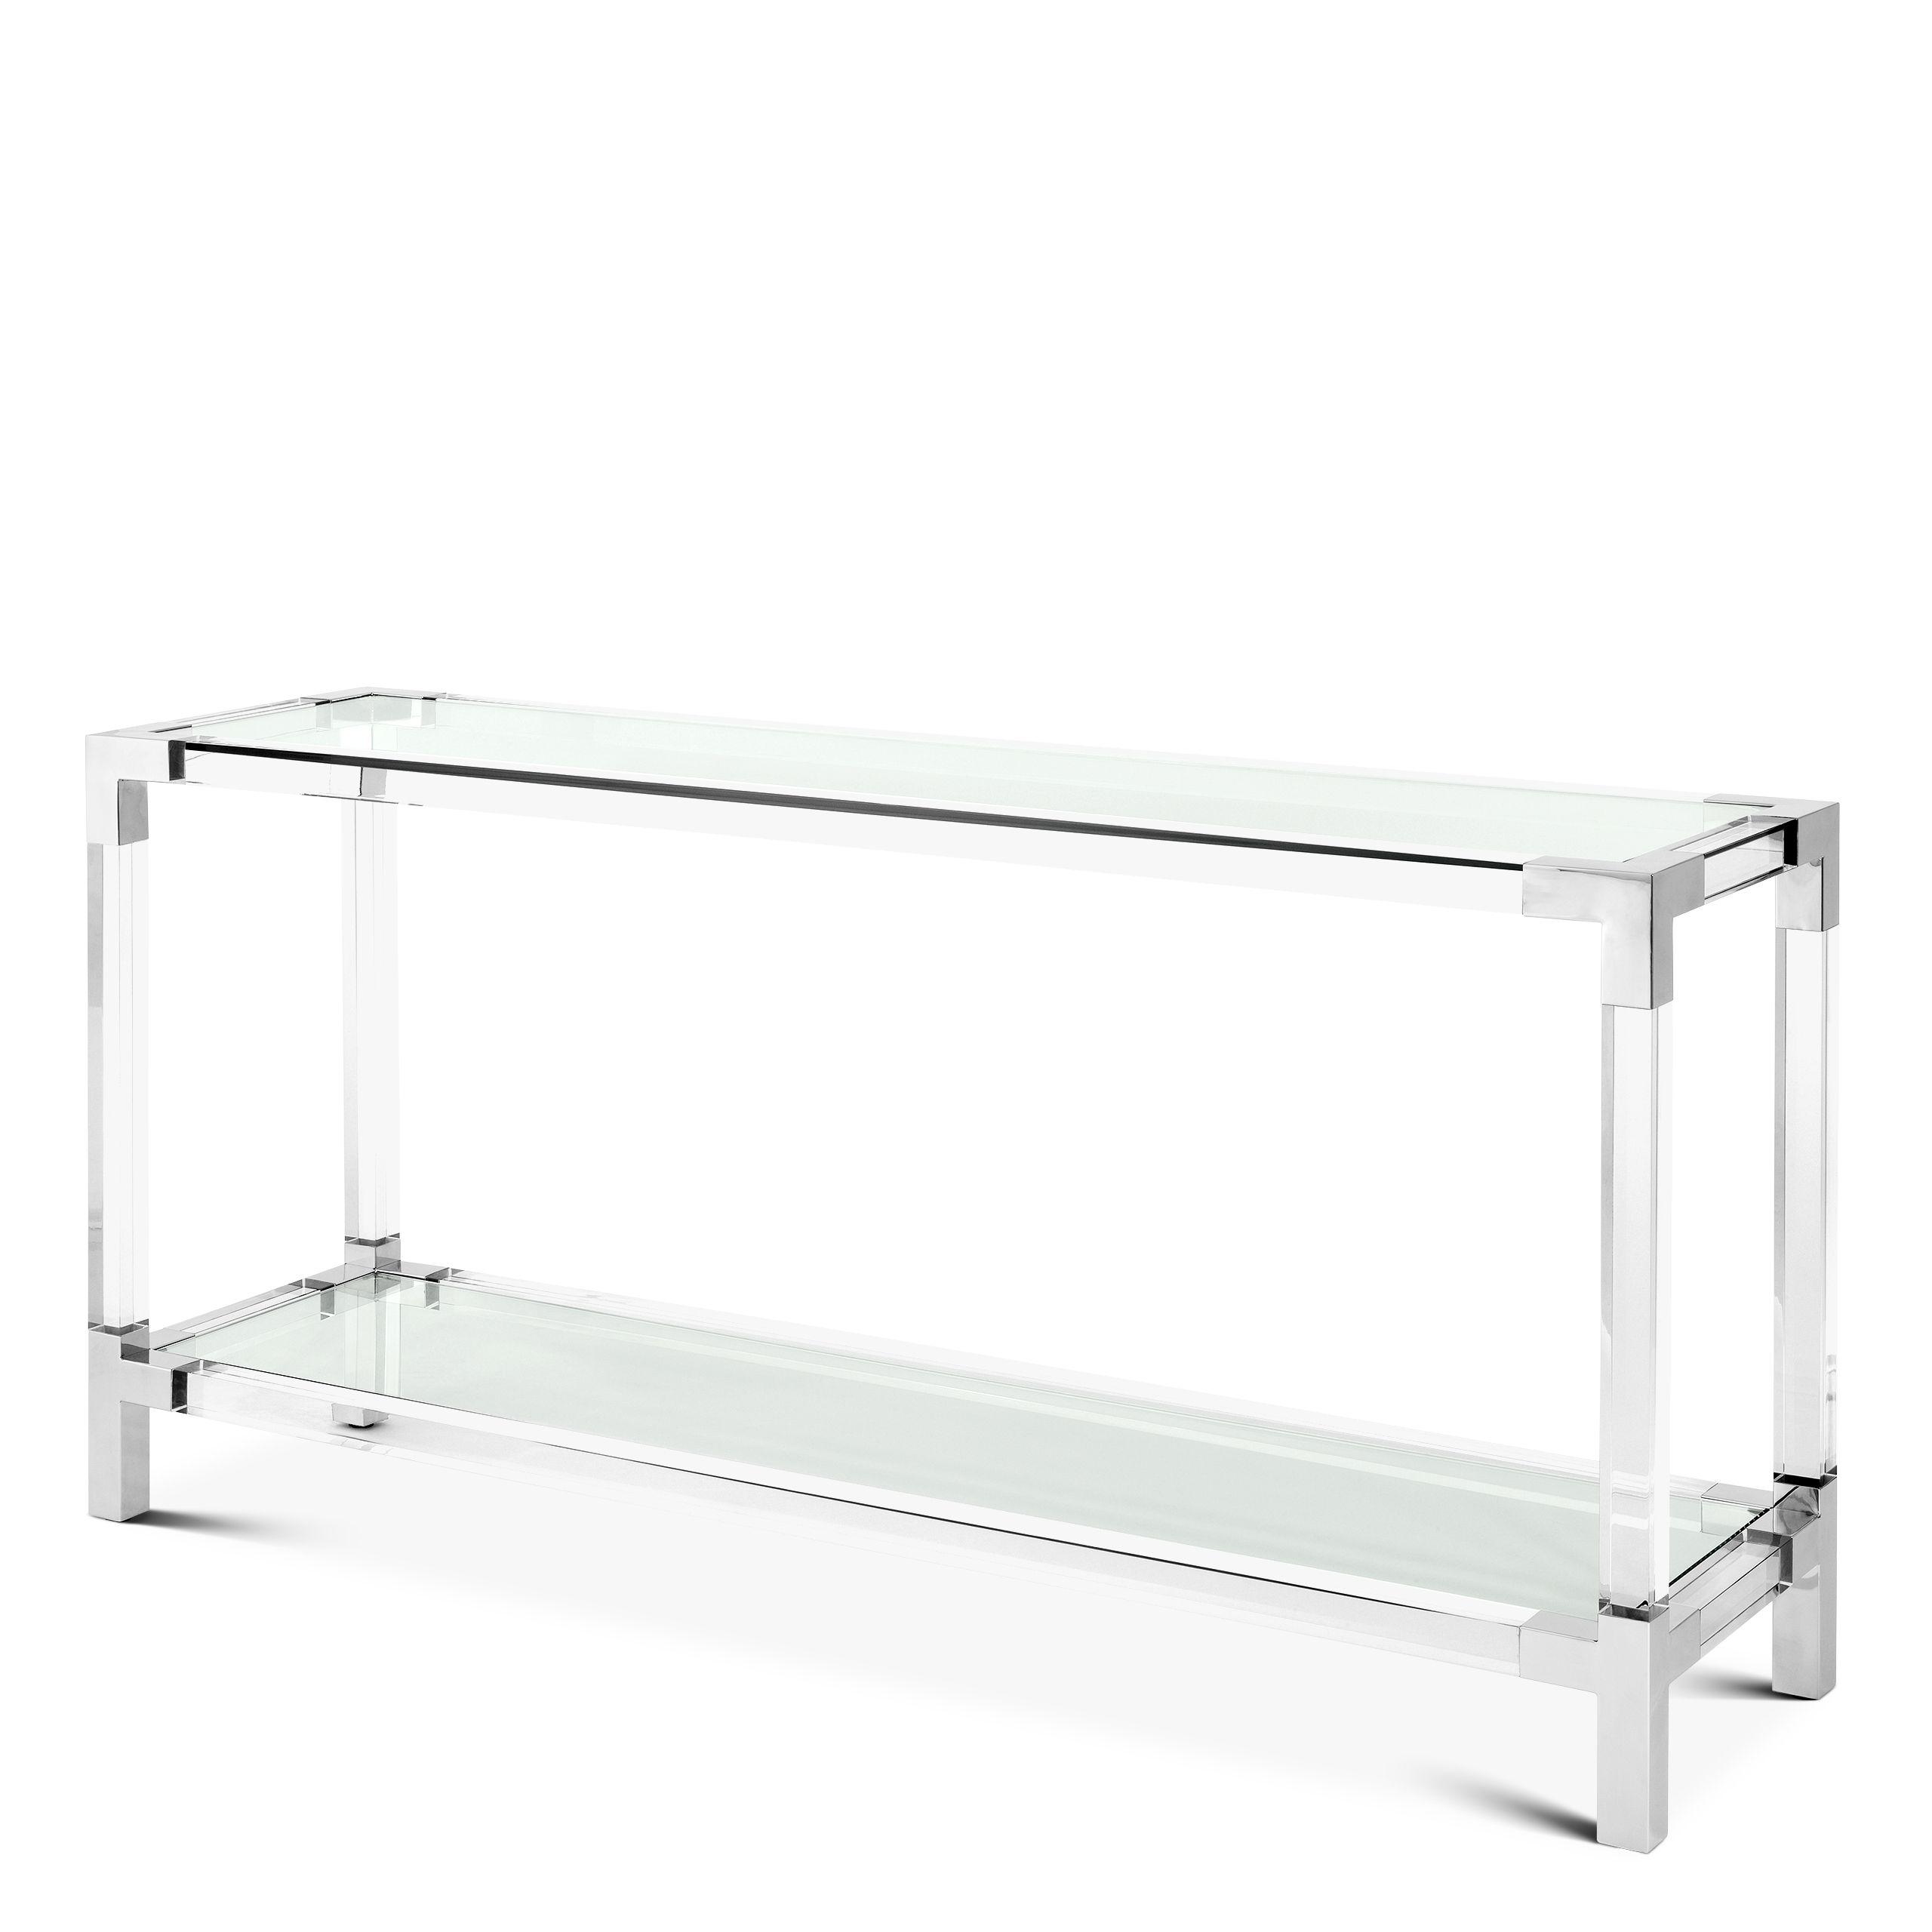 clear acrylic | polished stainless steel